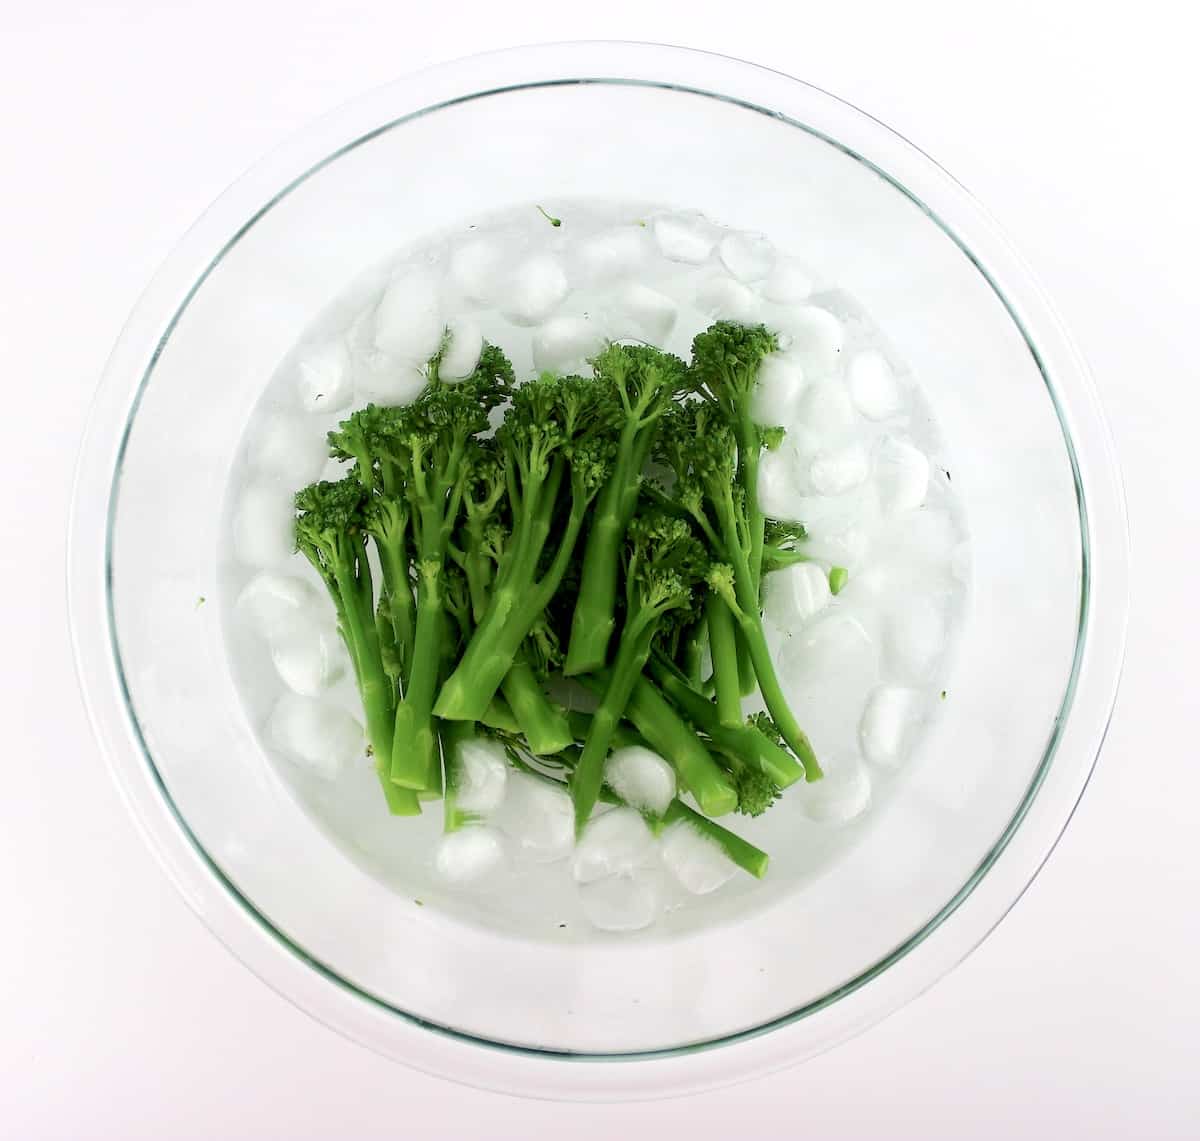 broccolini in water with ice in glass bowl